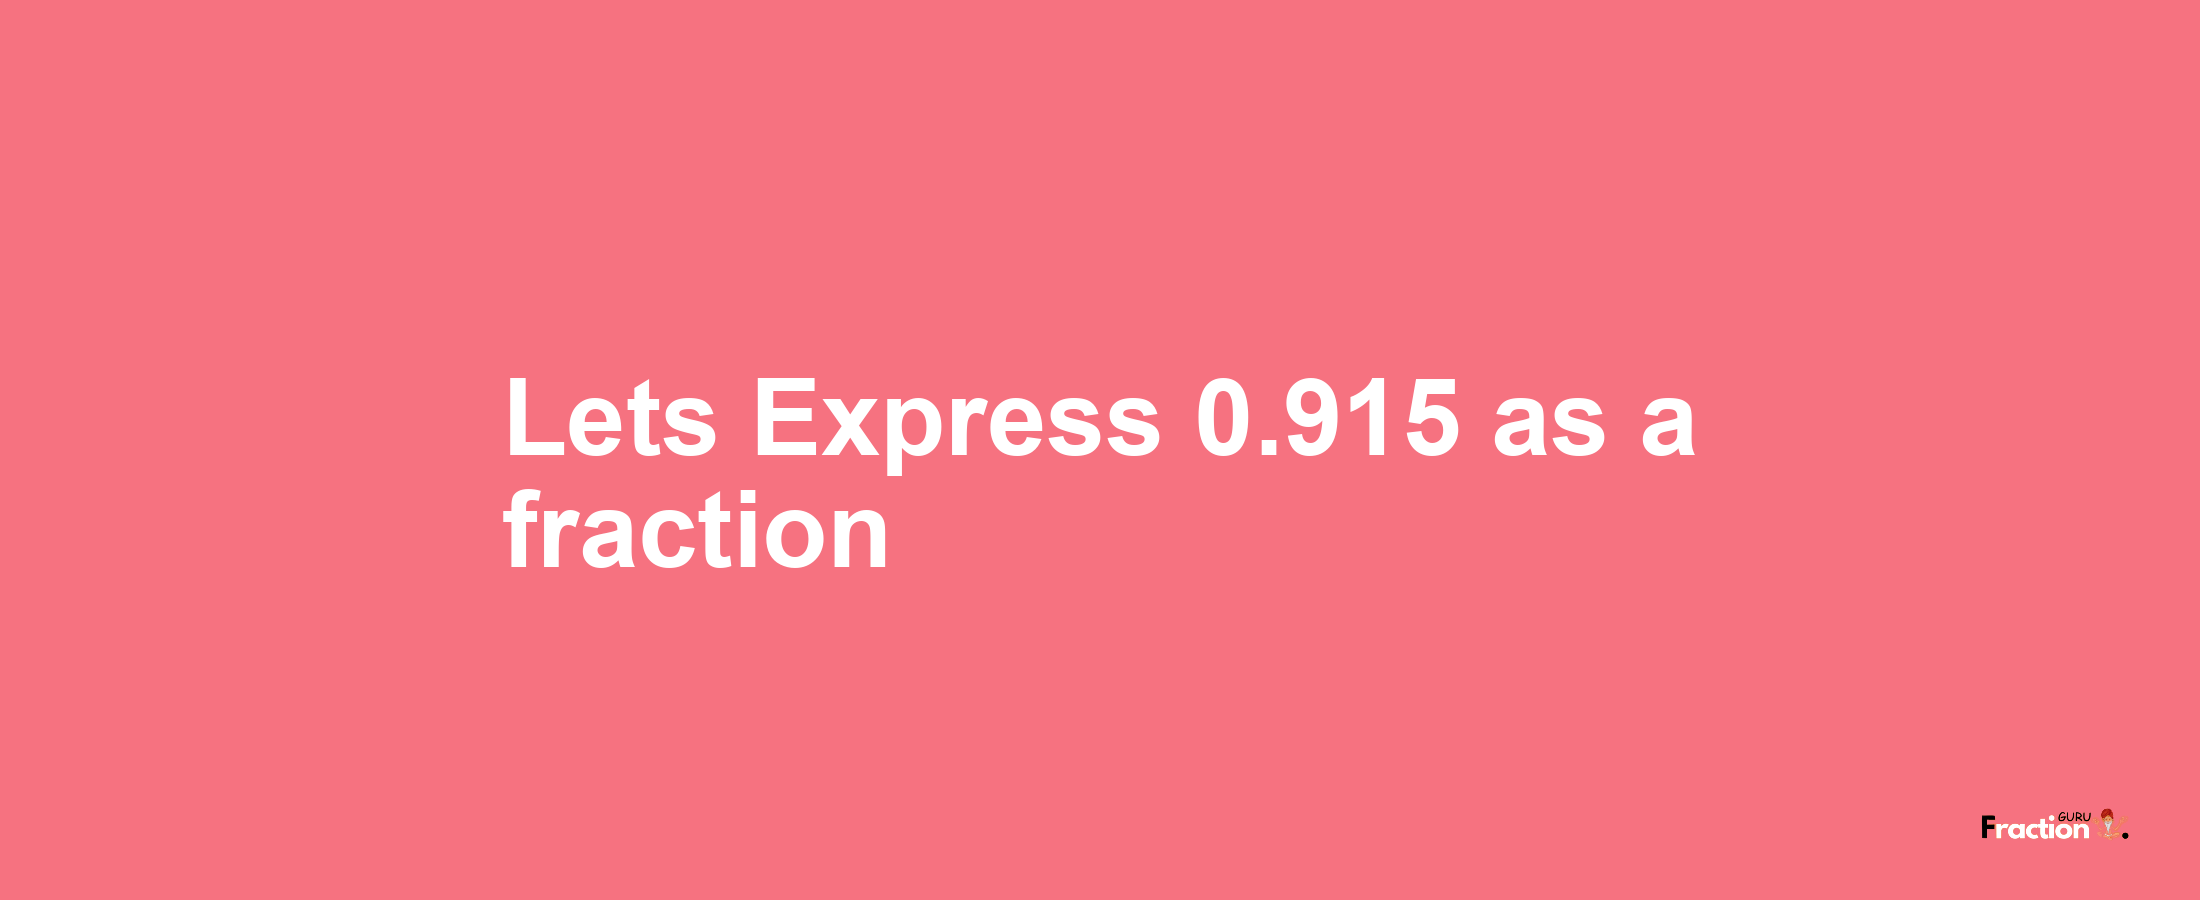 Lets Express 0.915 as afraction